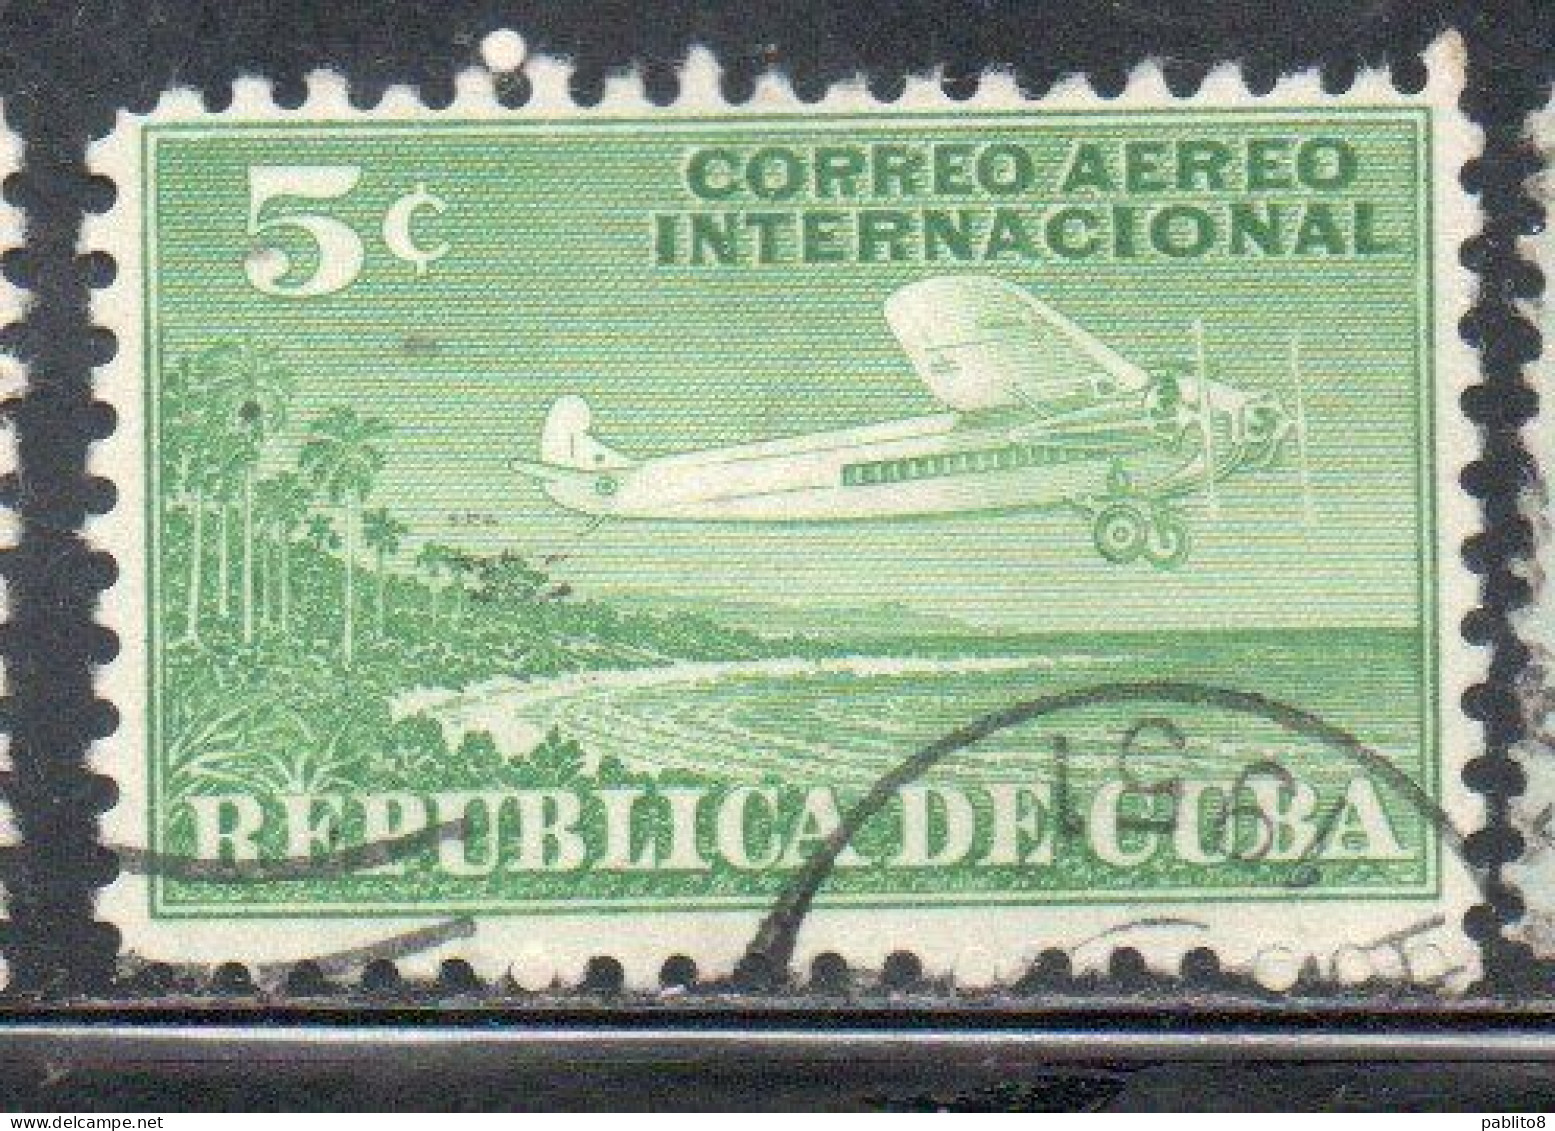 CUBA 1931 AIRMAIL AIR POST MAIL FOR FOREIGN POSTAGE PLANE AND COAST 5c USADO USED USATO OBLITERE' - Aéreo